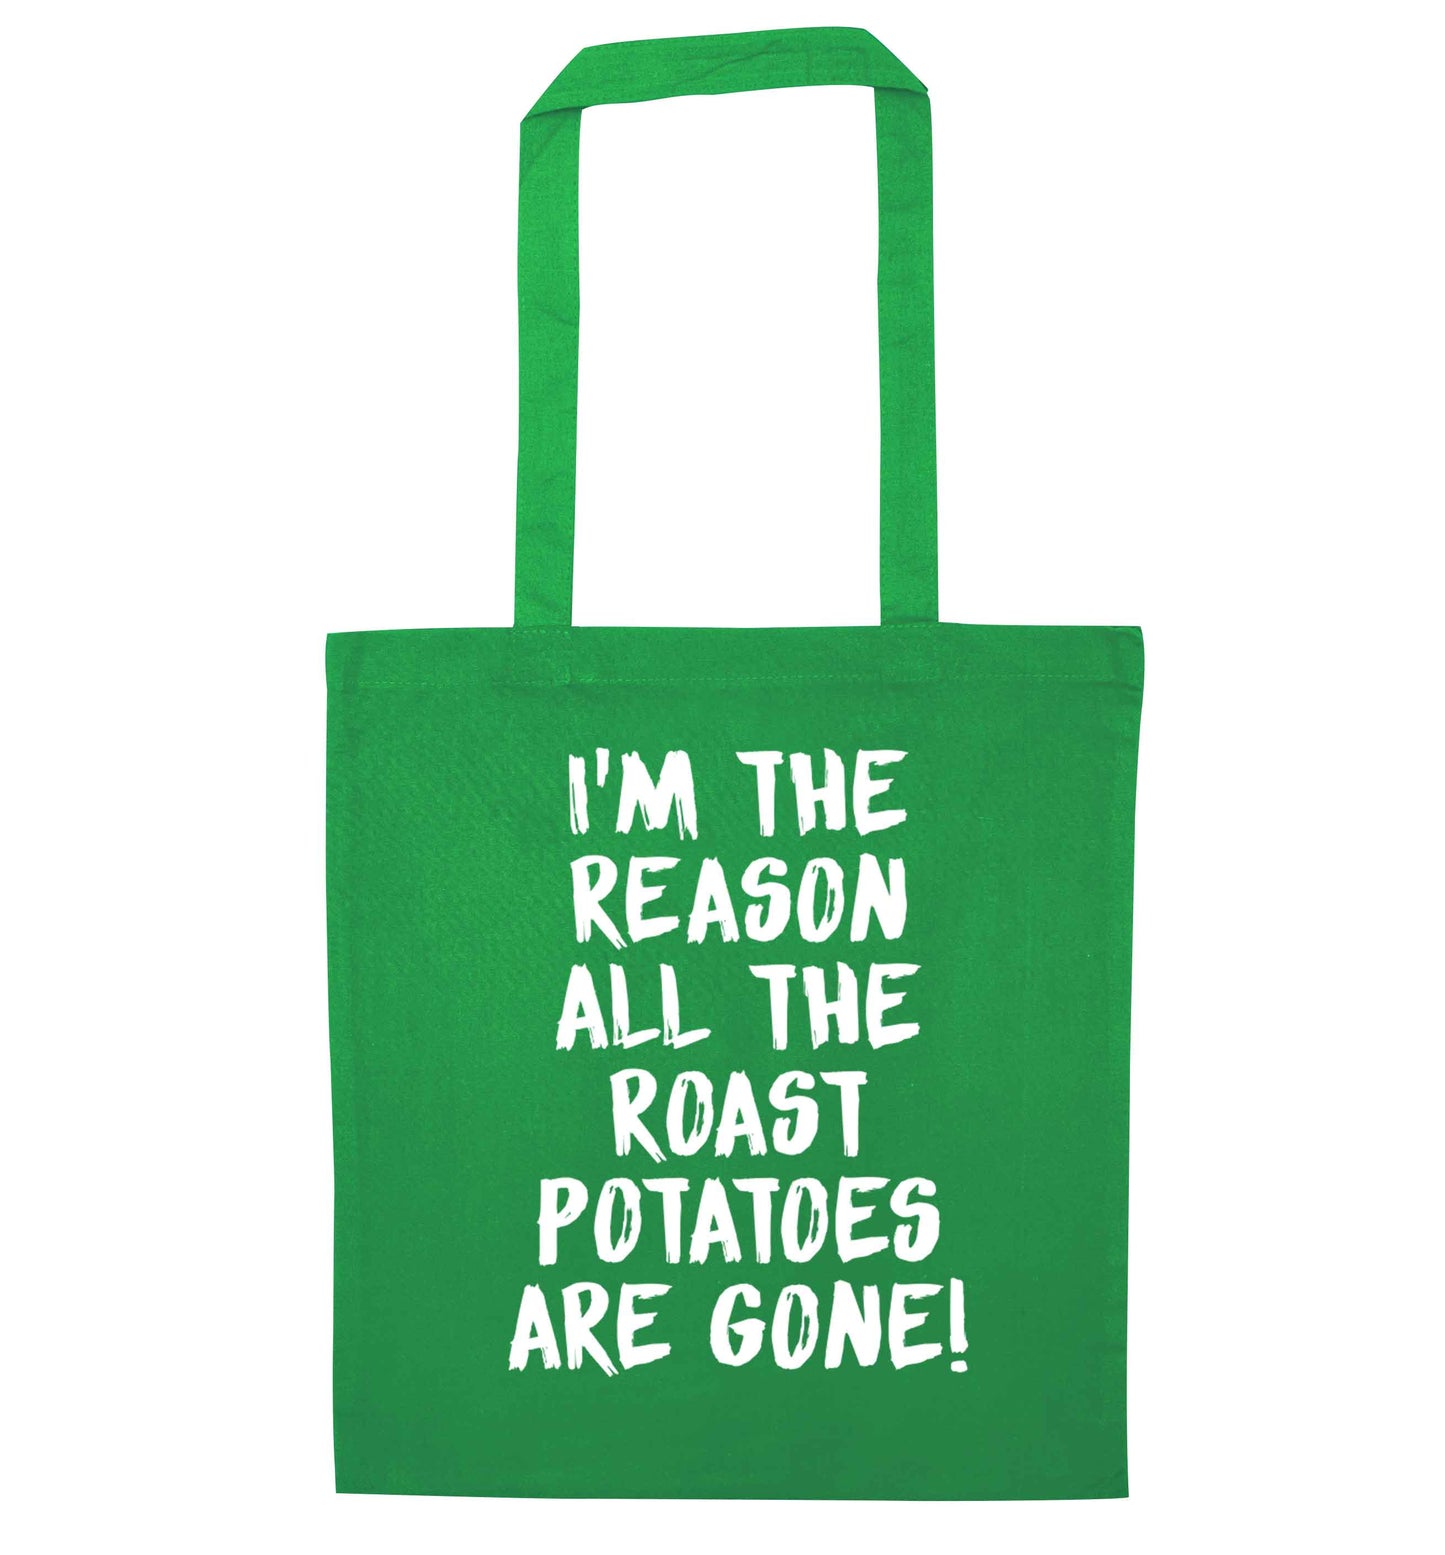 I'm the reason all the roast potatoes are gone green tote bag